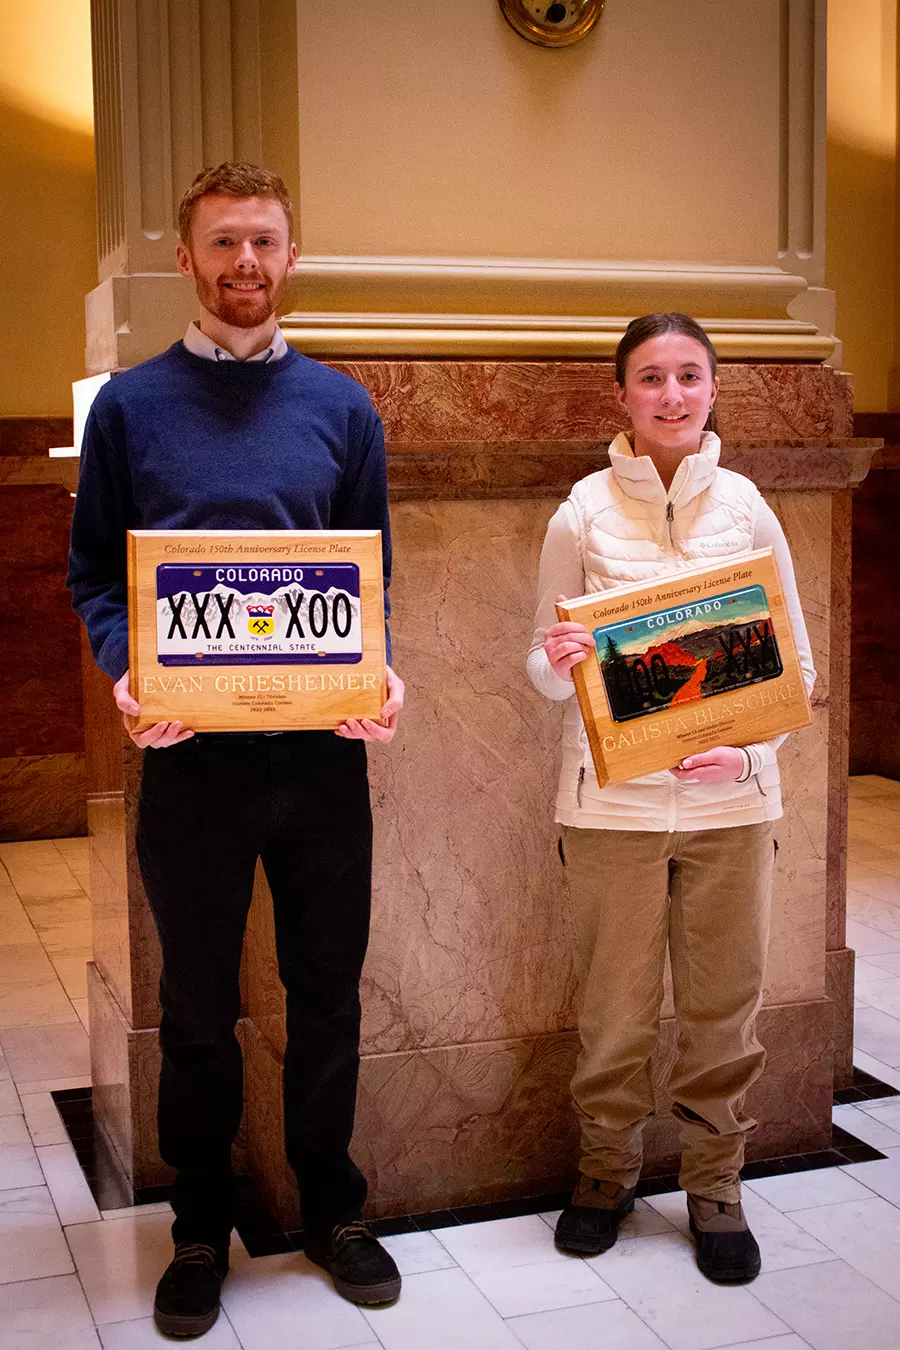 Evan Griesheimer and Calista Blaschke pose at the State Capitol with their winning license plate designs mounted on a wooden plaque